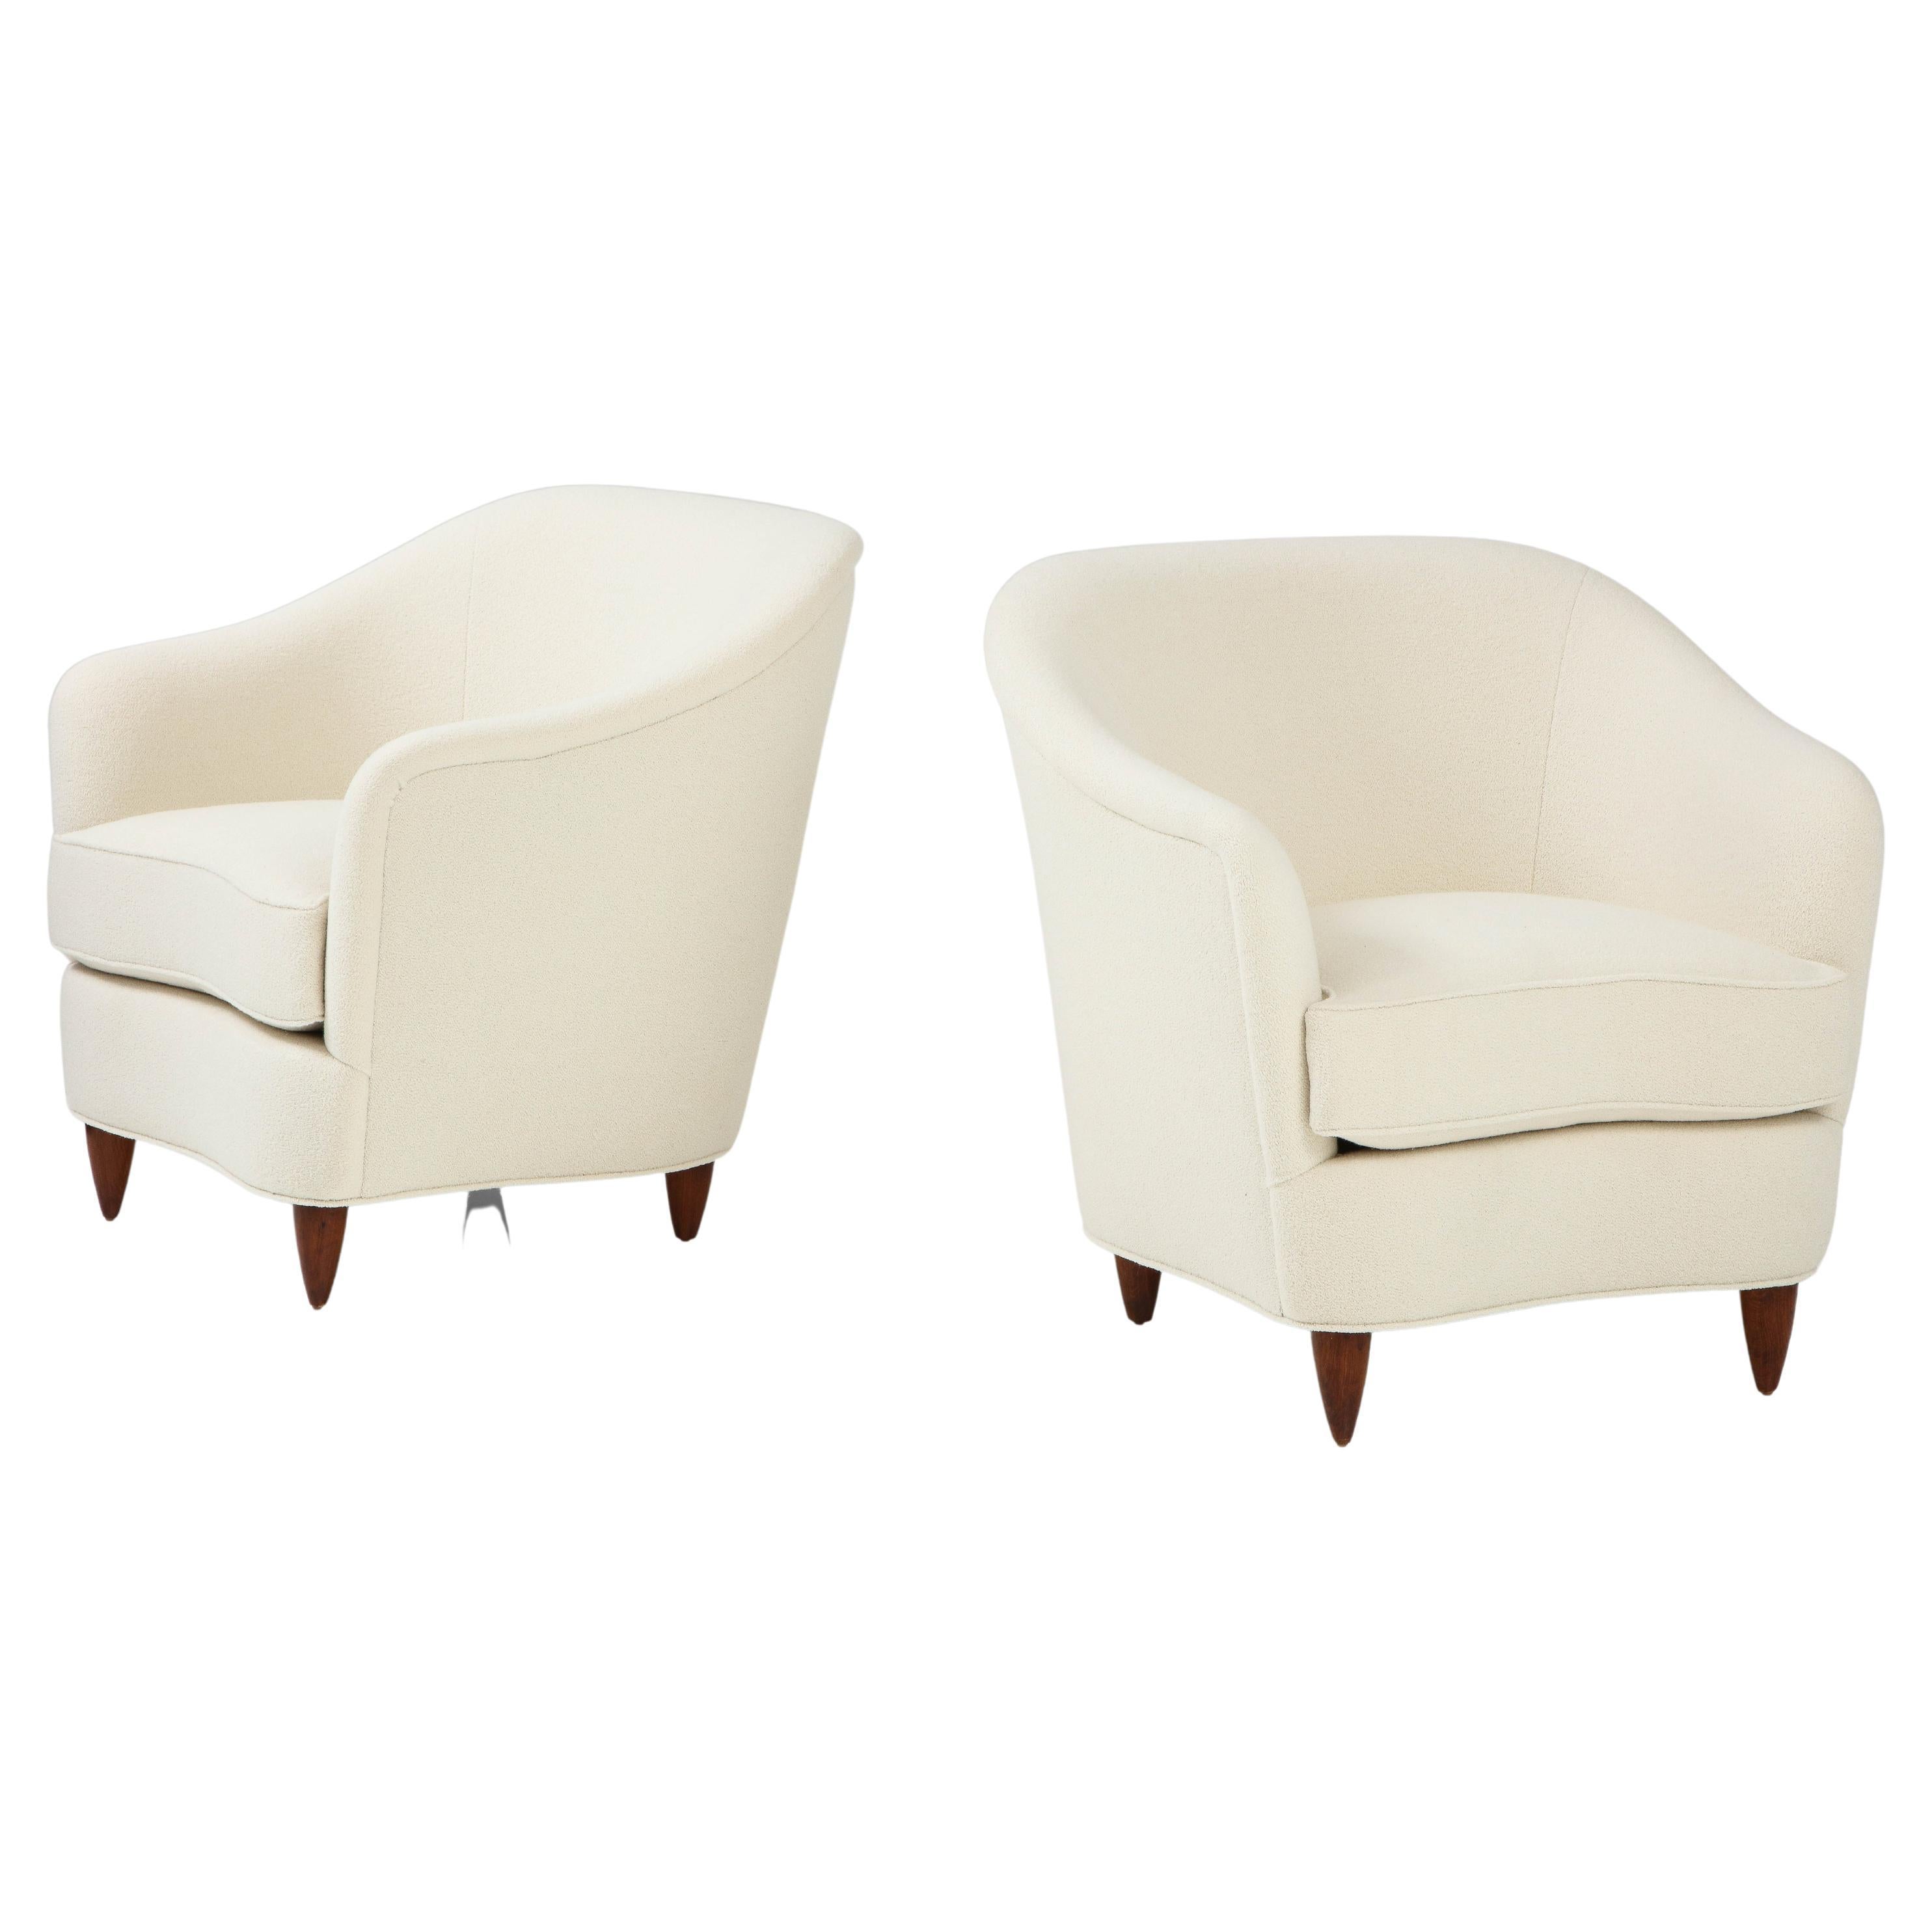 Gio Ponti for Casa e Giardino Pair of Armchairs or Lounge Chairs in Ivory Bouclé